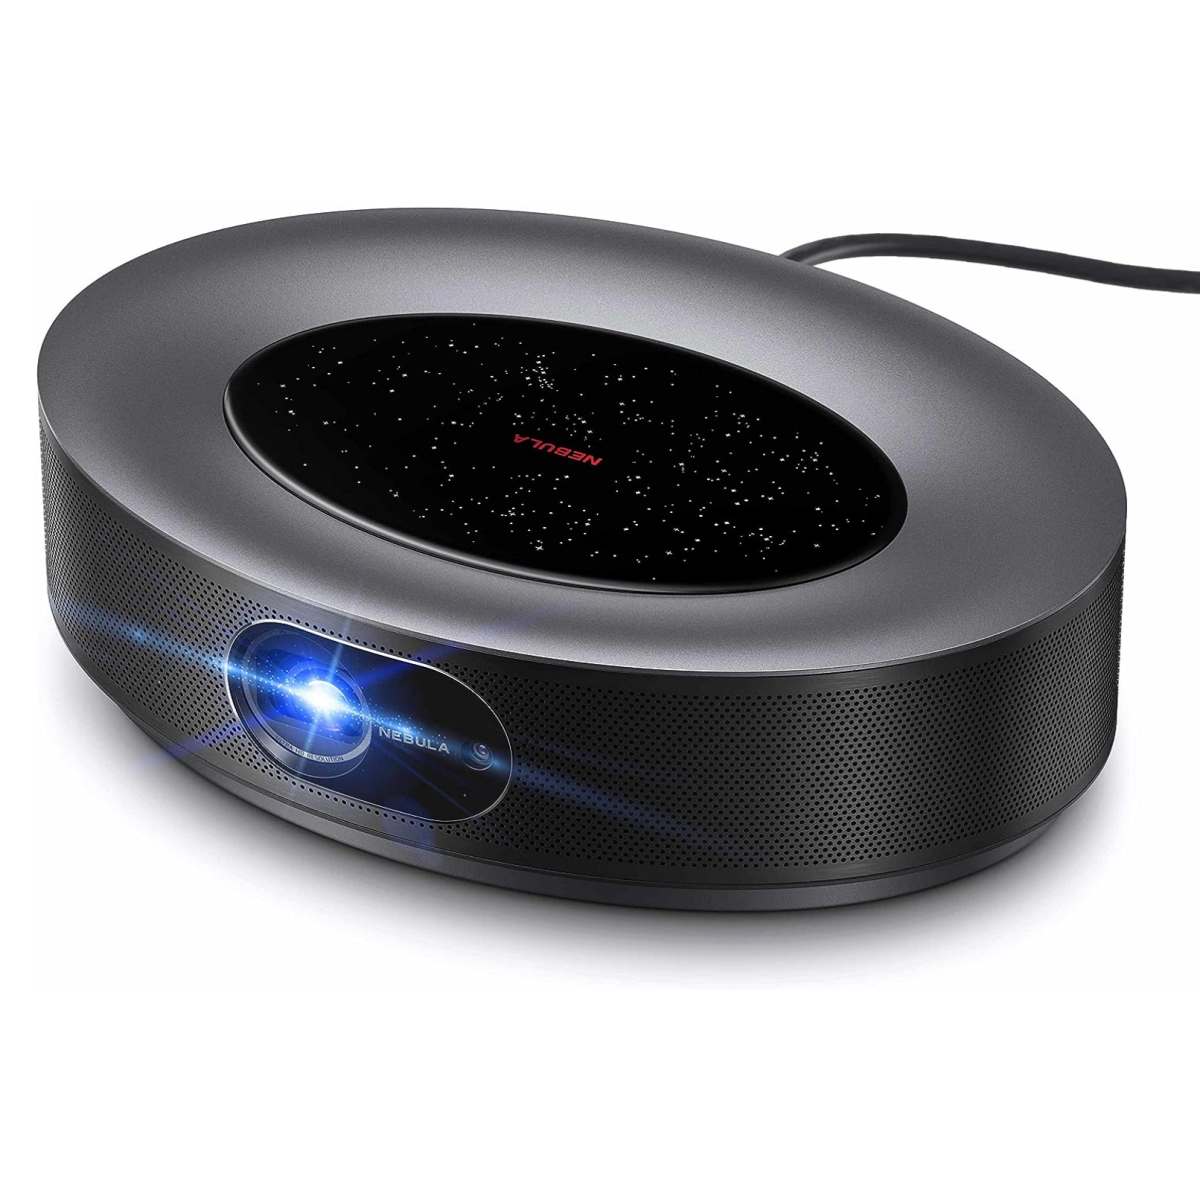 An Anker Nebula Cosmos Max 4K projector